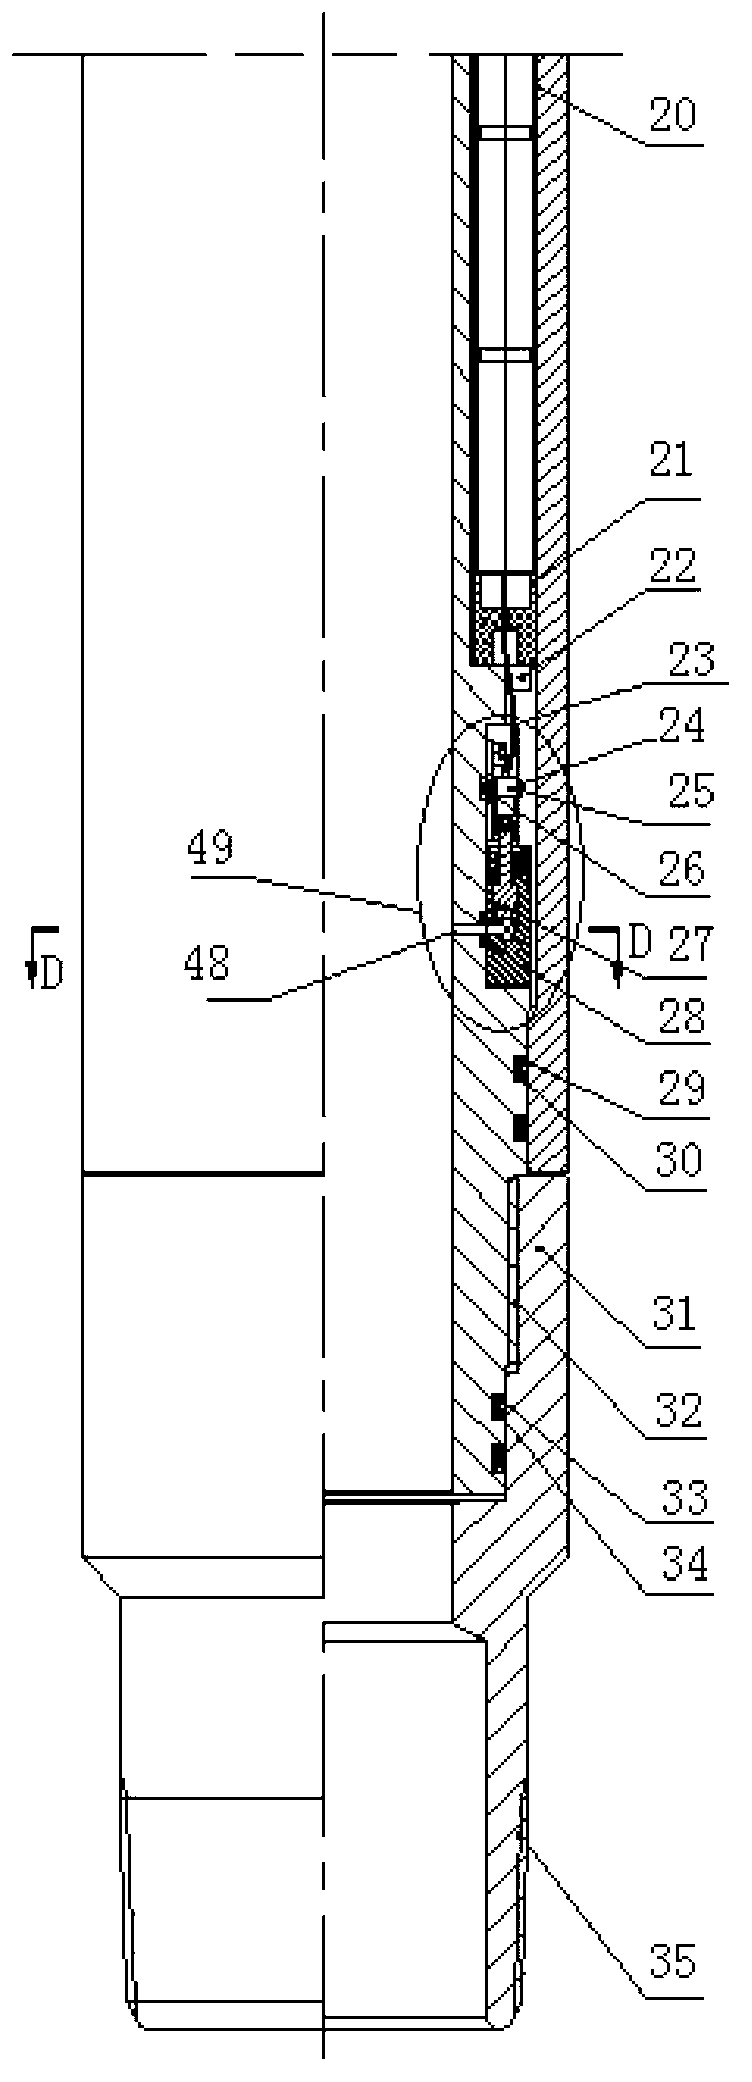 Downhole petroleum formation fracturing string tension detecting instrument